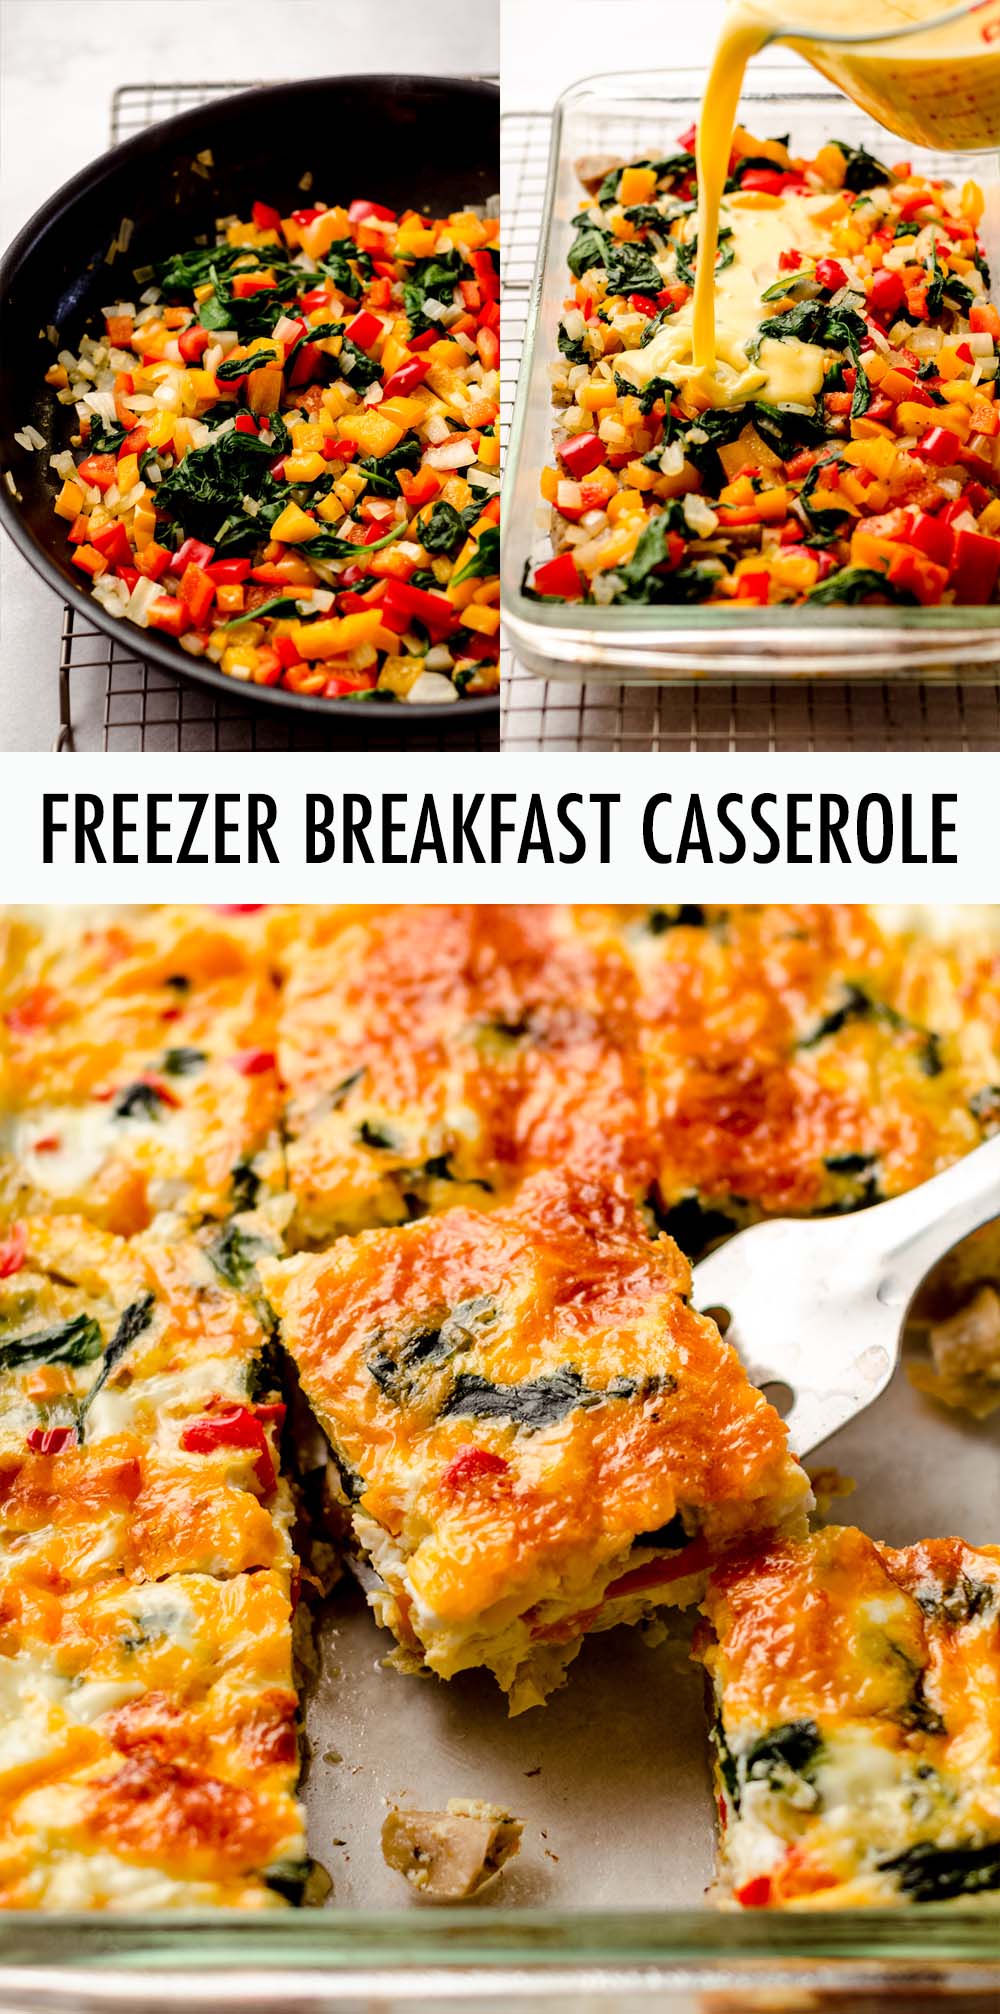 This overnight sausage, vegetable, and egg casserole can be baked right away, made up to a day in advance, or frozen for easy entertaining. Completely customizable and great for feeding a crowd! via @frshaprilflours